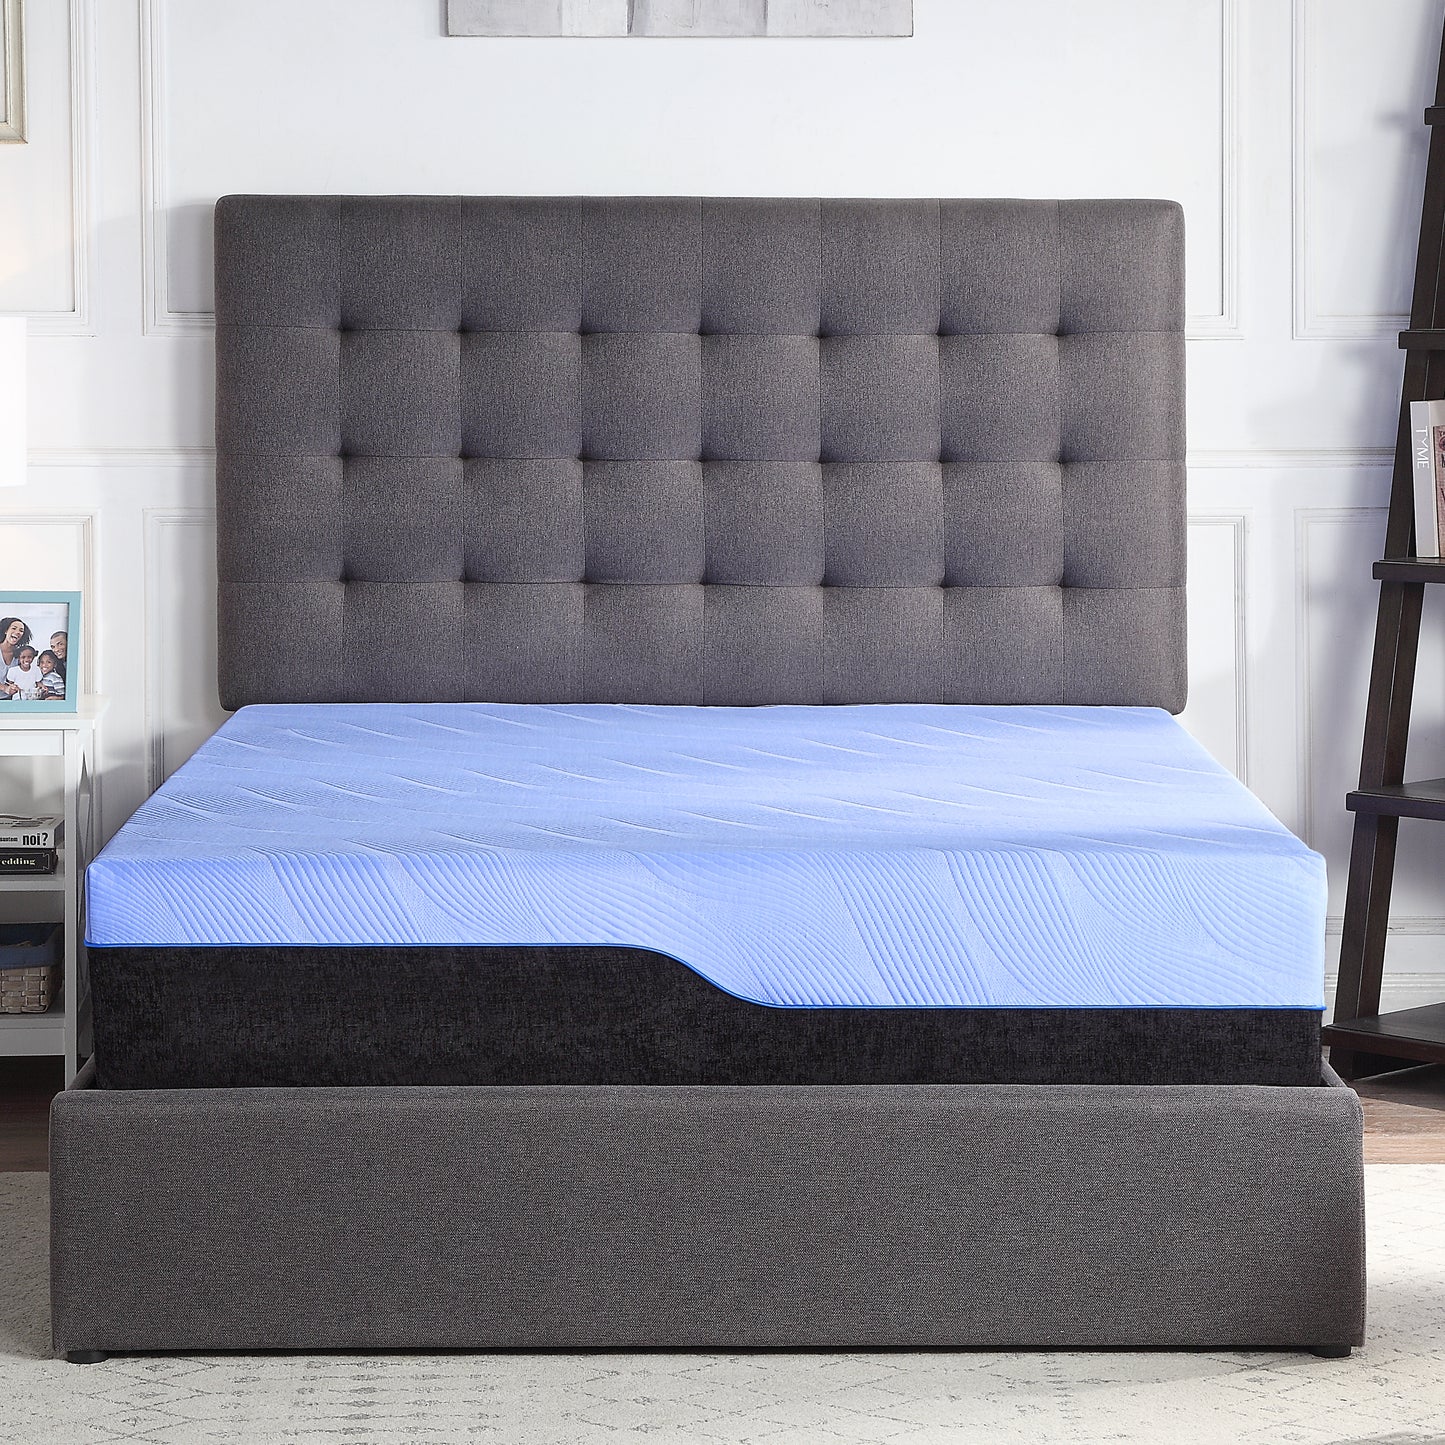 Bridgevine Home 12 inch King Size 5-Layer Hybrid Latex Foam and Coil Adult Mattress